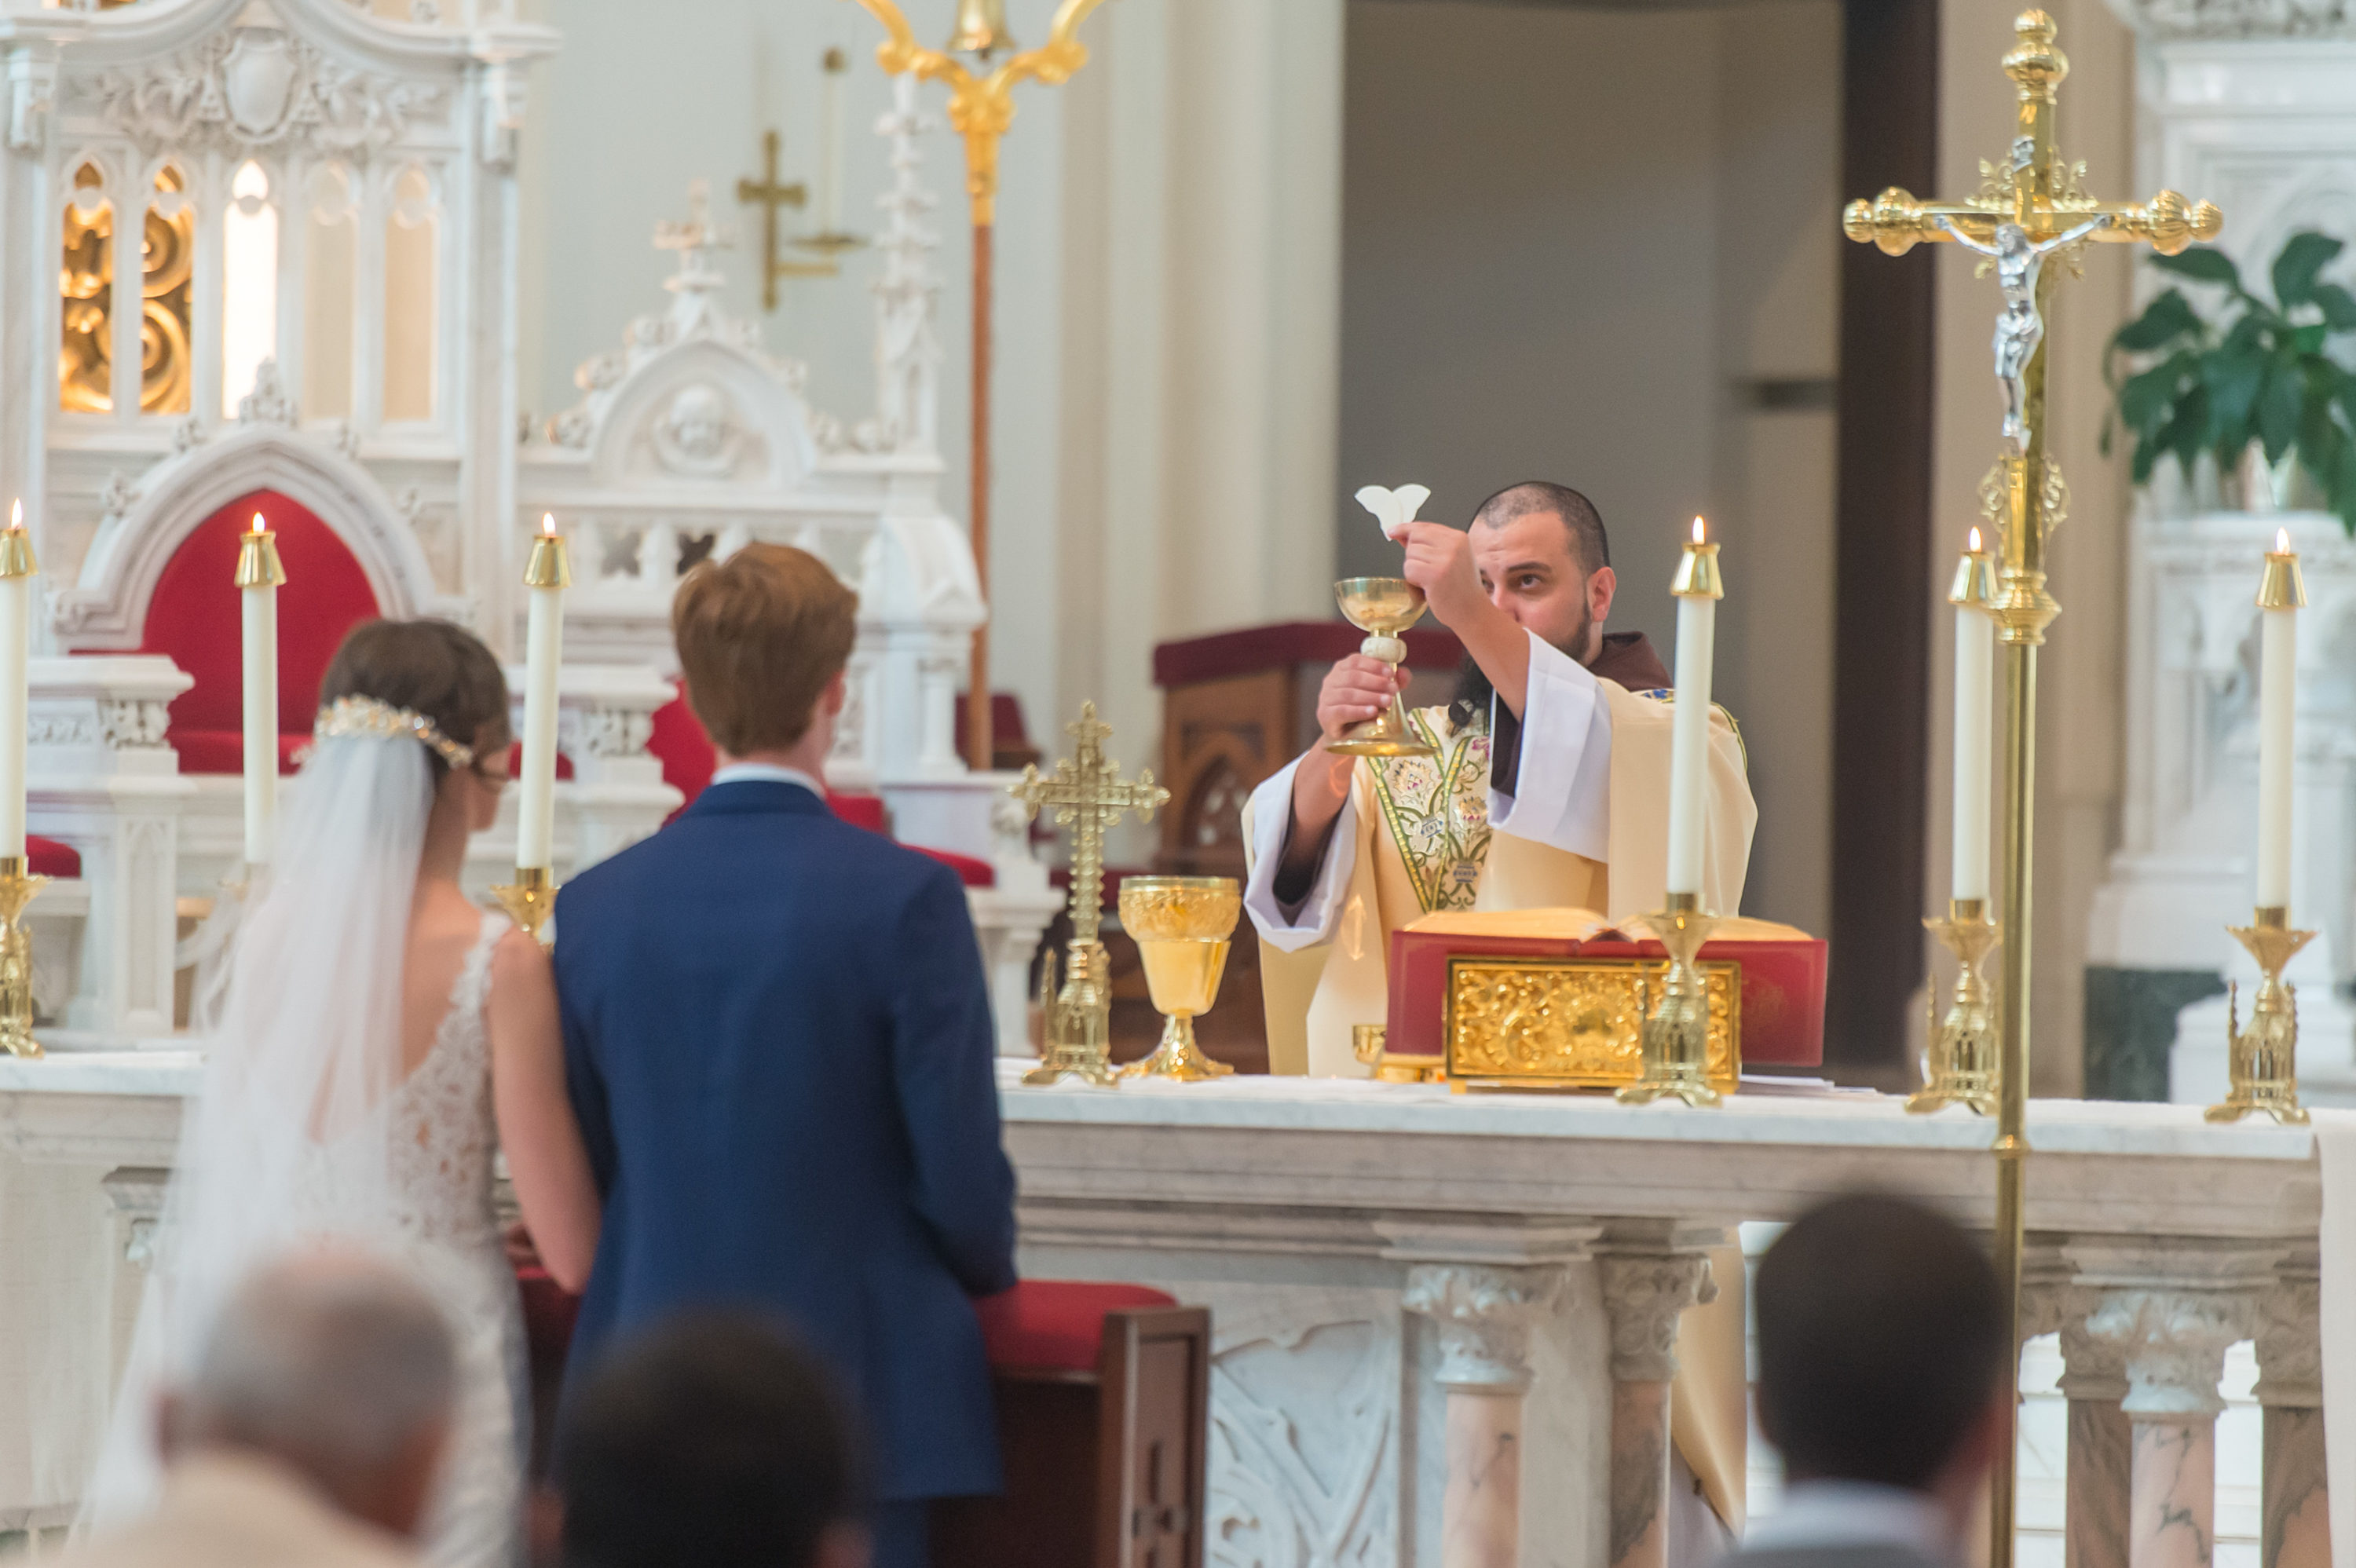 The priest holds consecrated host and wine during a Cathedral Basilica of the Immaculate Conception wedding in Denver, Colorado.